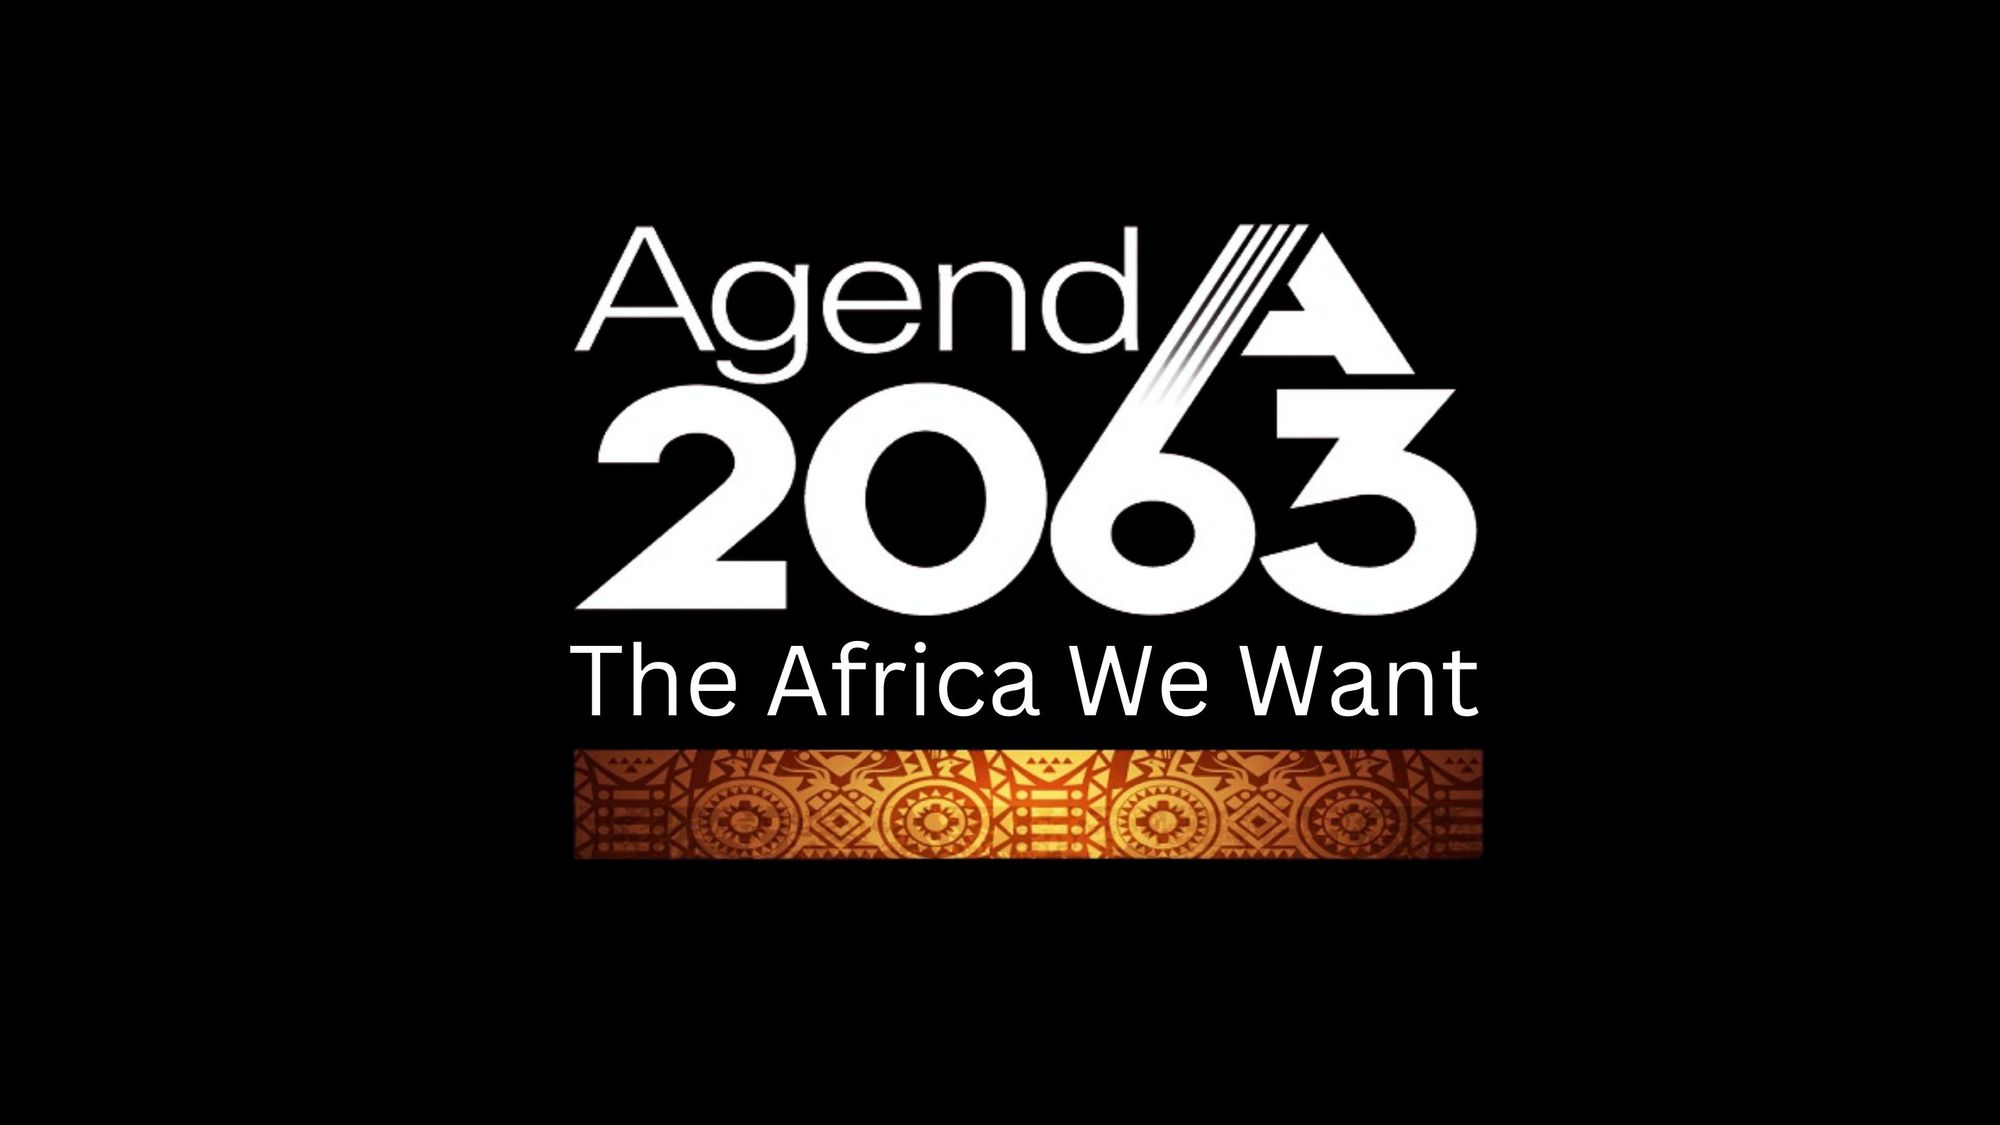 Agenda africa 2063 promoted by ECOWAS